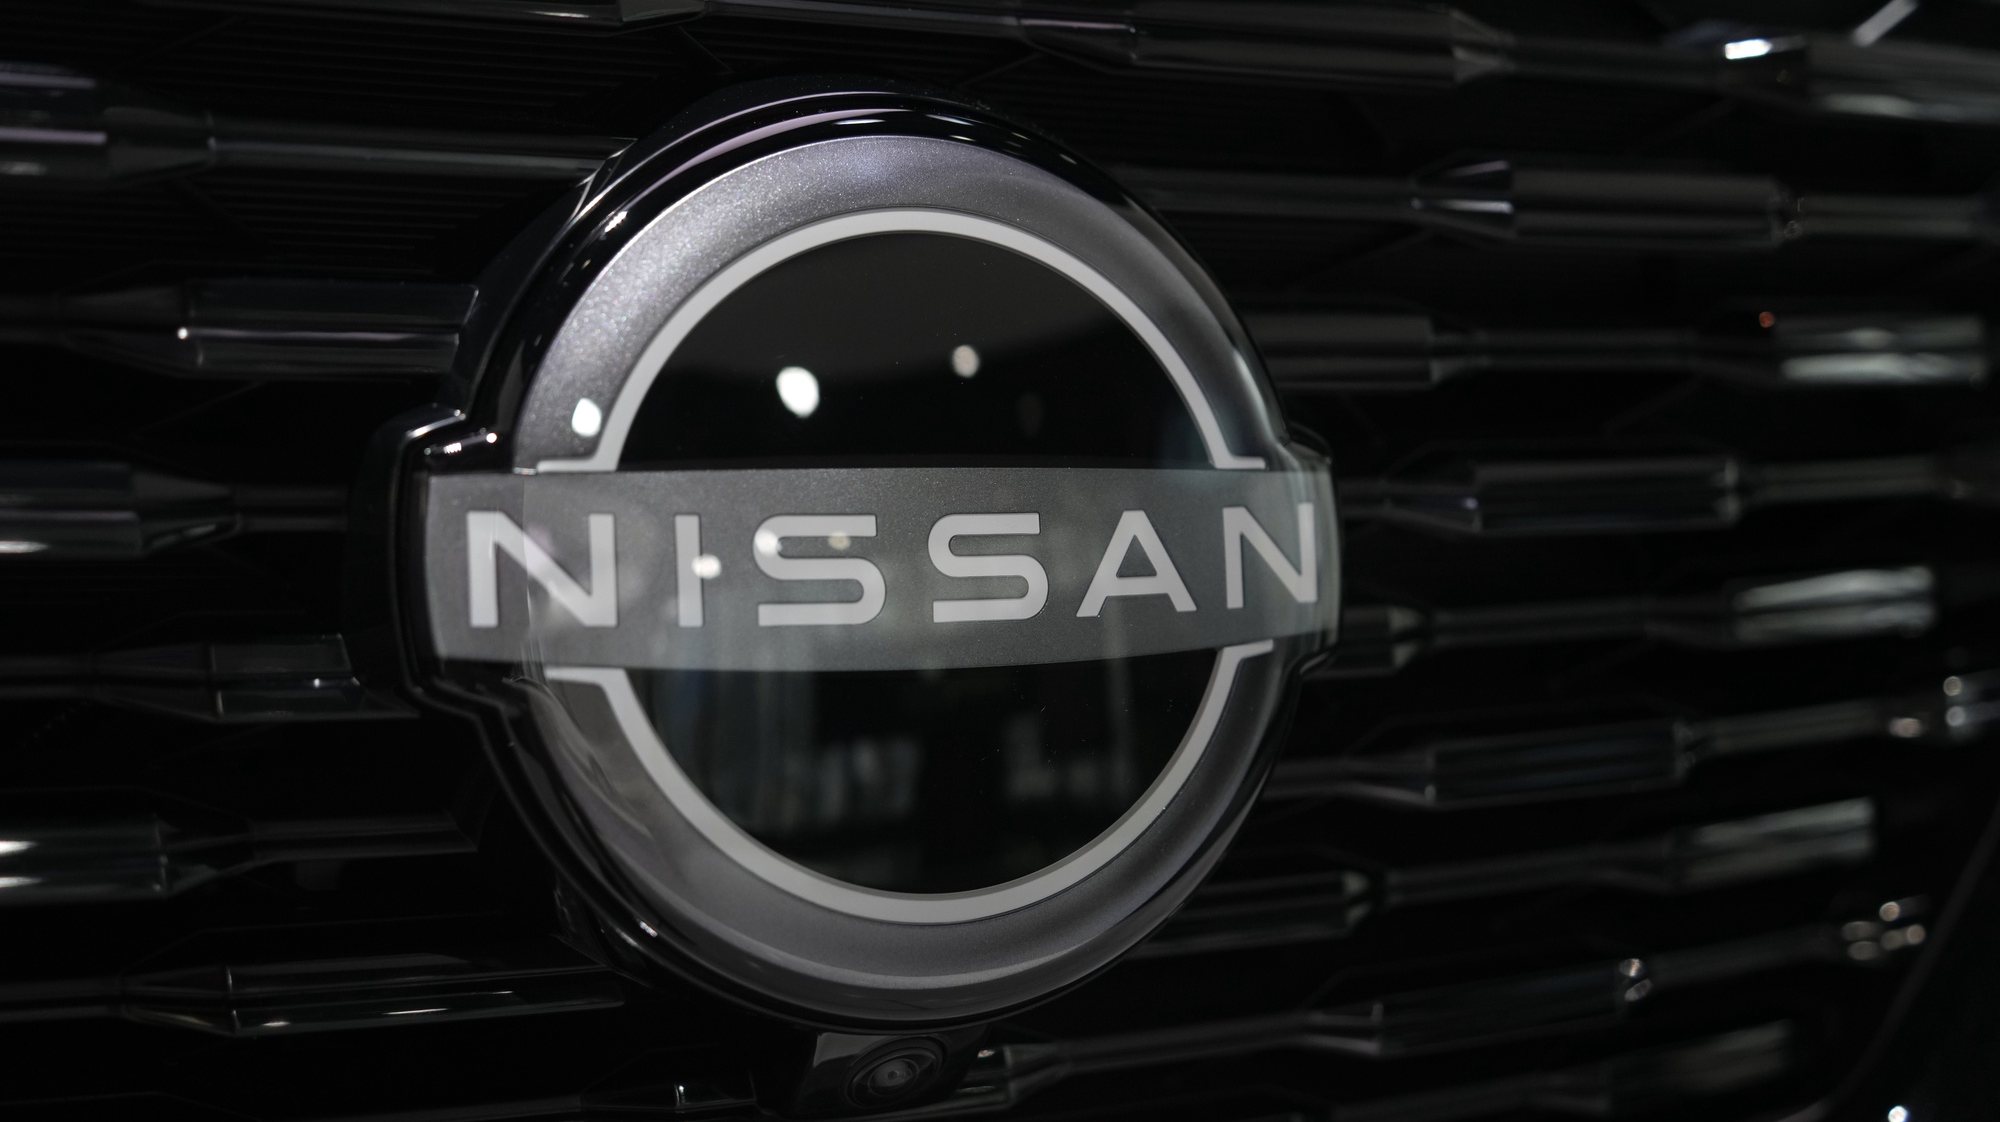 epa10620518 The Nissan logo is seen on a vehicle at a showroom in Tokyo, Japan, 11 May 2023. In its consolidated financial results for the fiscal year ending 31 March 2023, Nissan Motor Corporation announced that its net profit increased by 3 percent to 221.9 billion yen (1.65 billion USD).  EPA/FRANCK ROBICHON